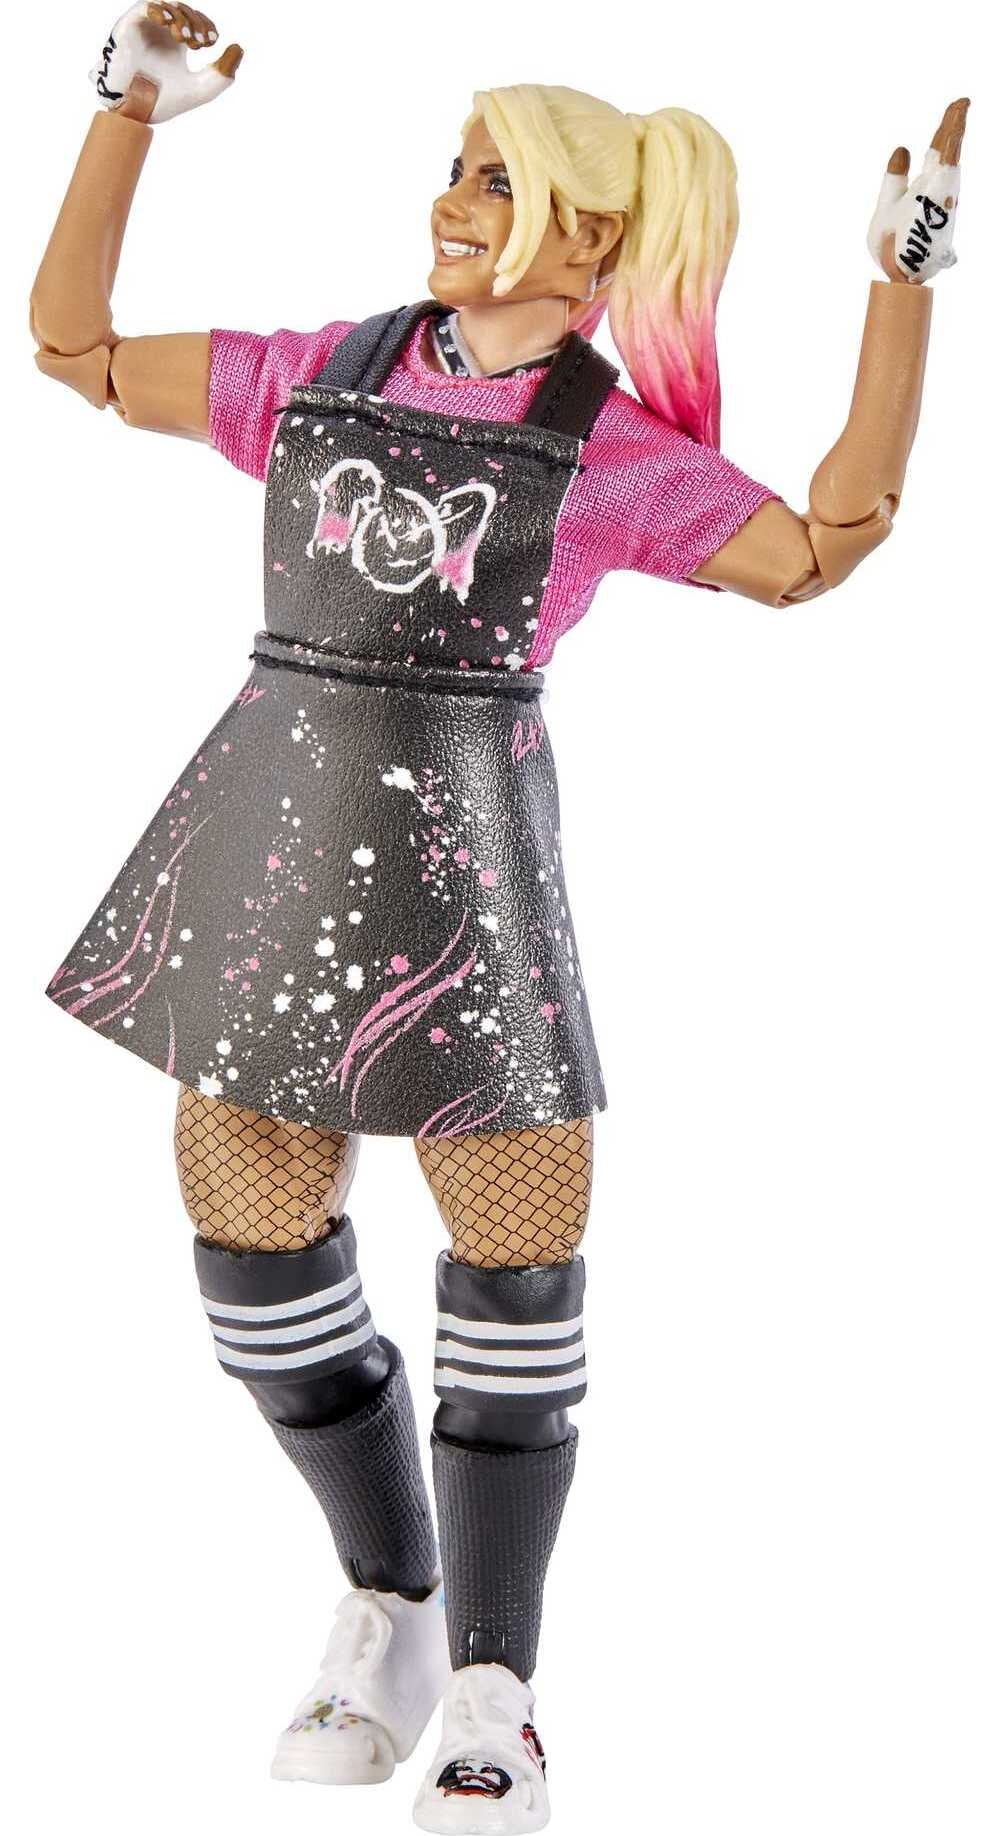 WWE Ultimate Edition Alexa Bliss Action Figure, 6-Inch Collectible